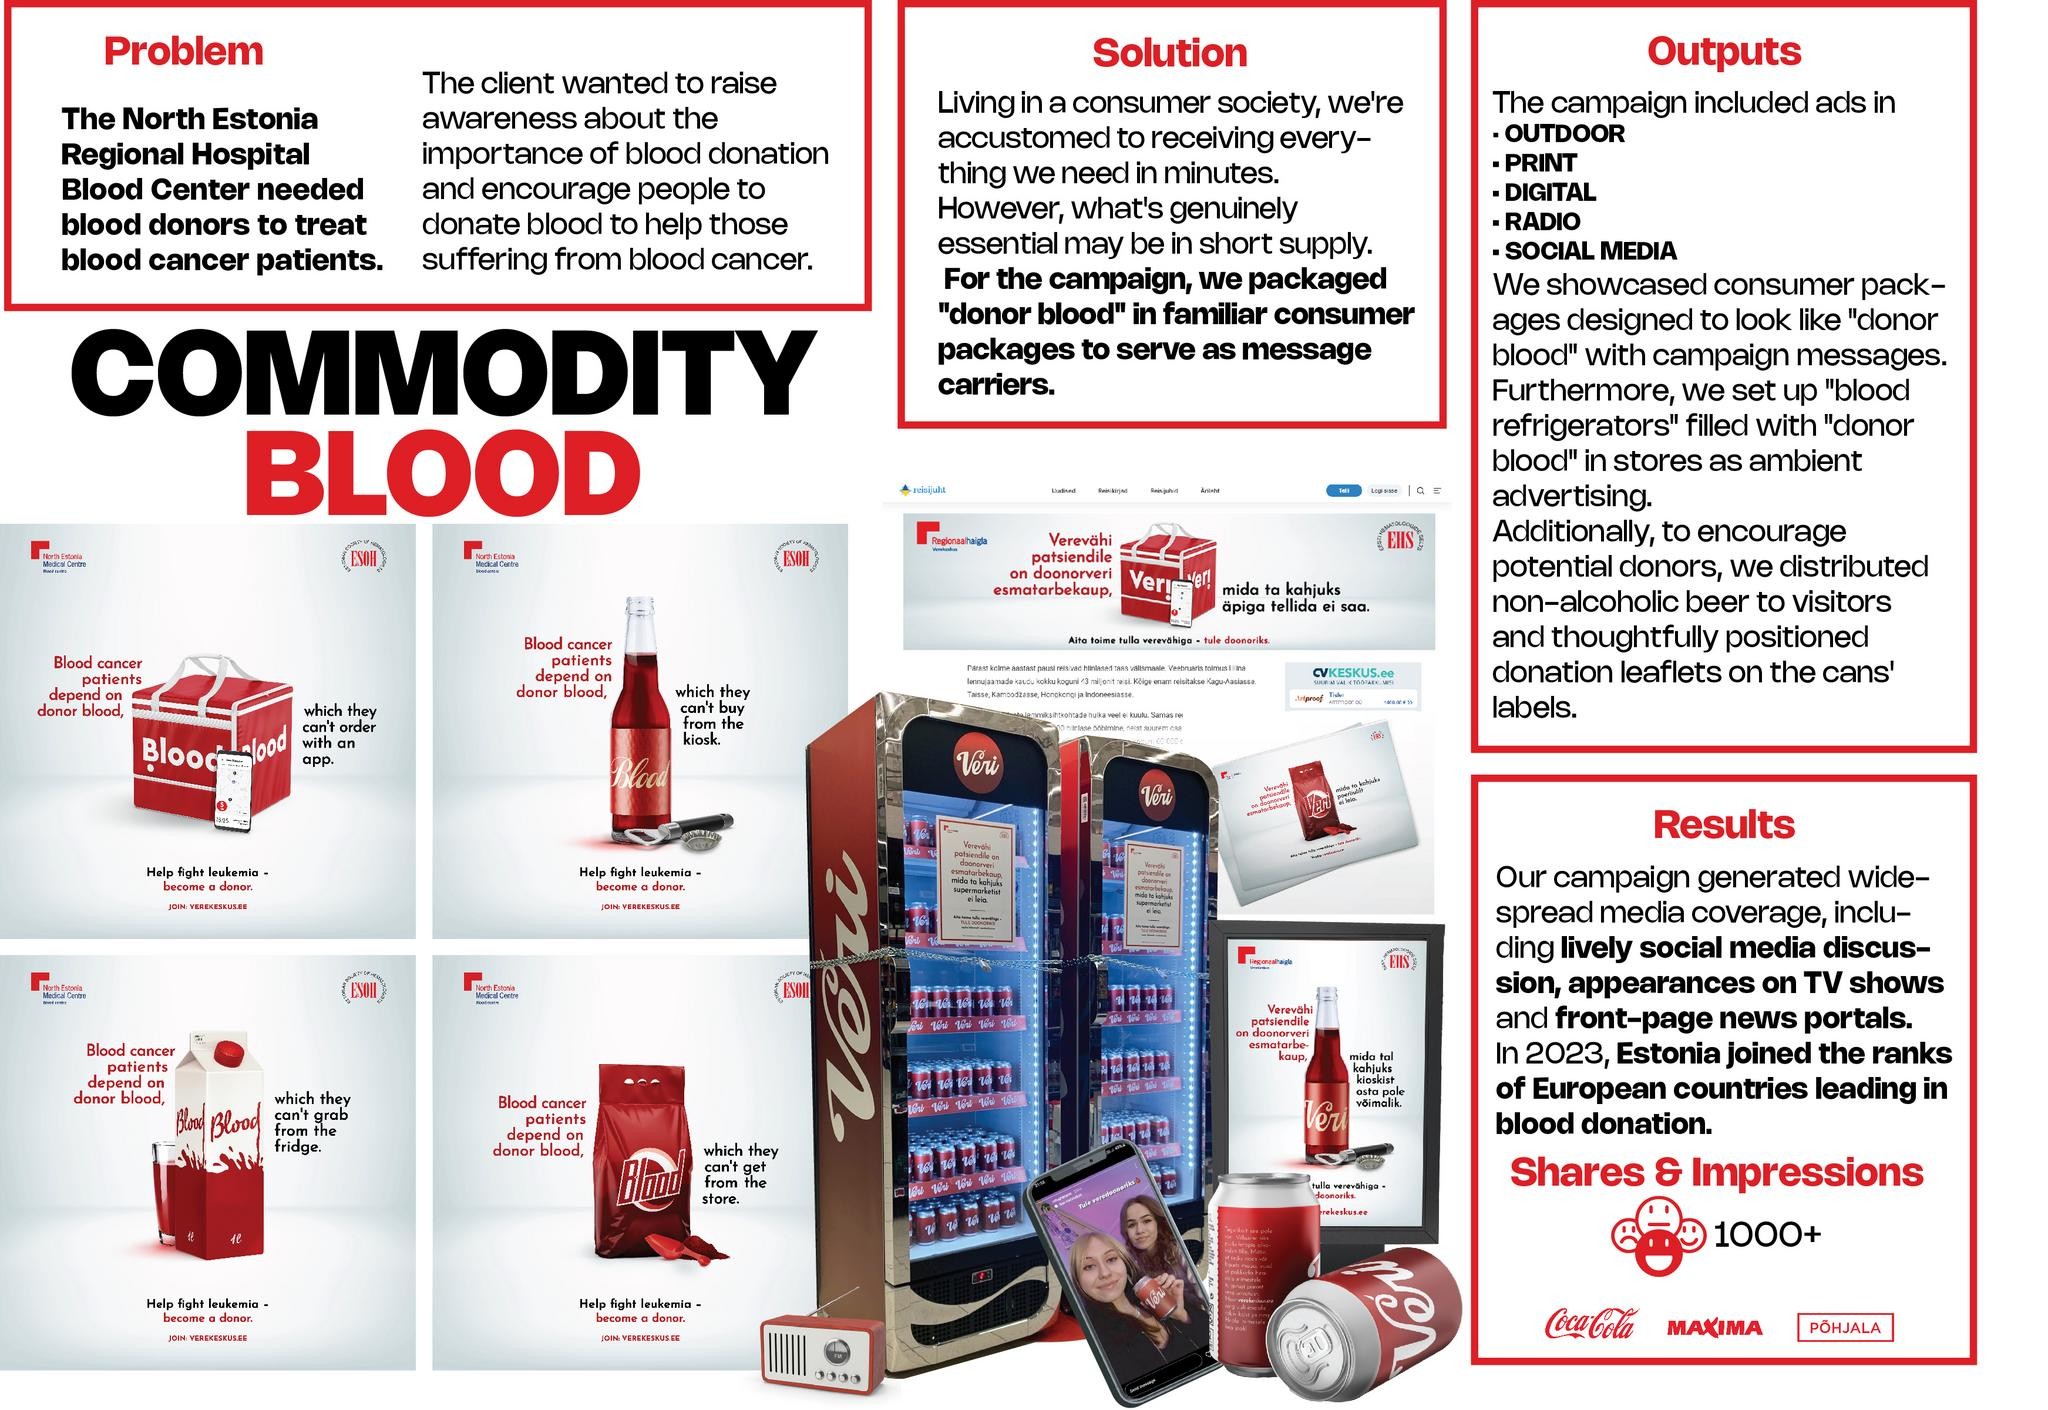 COMMODITY BLOOD